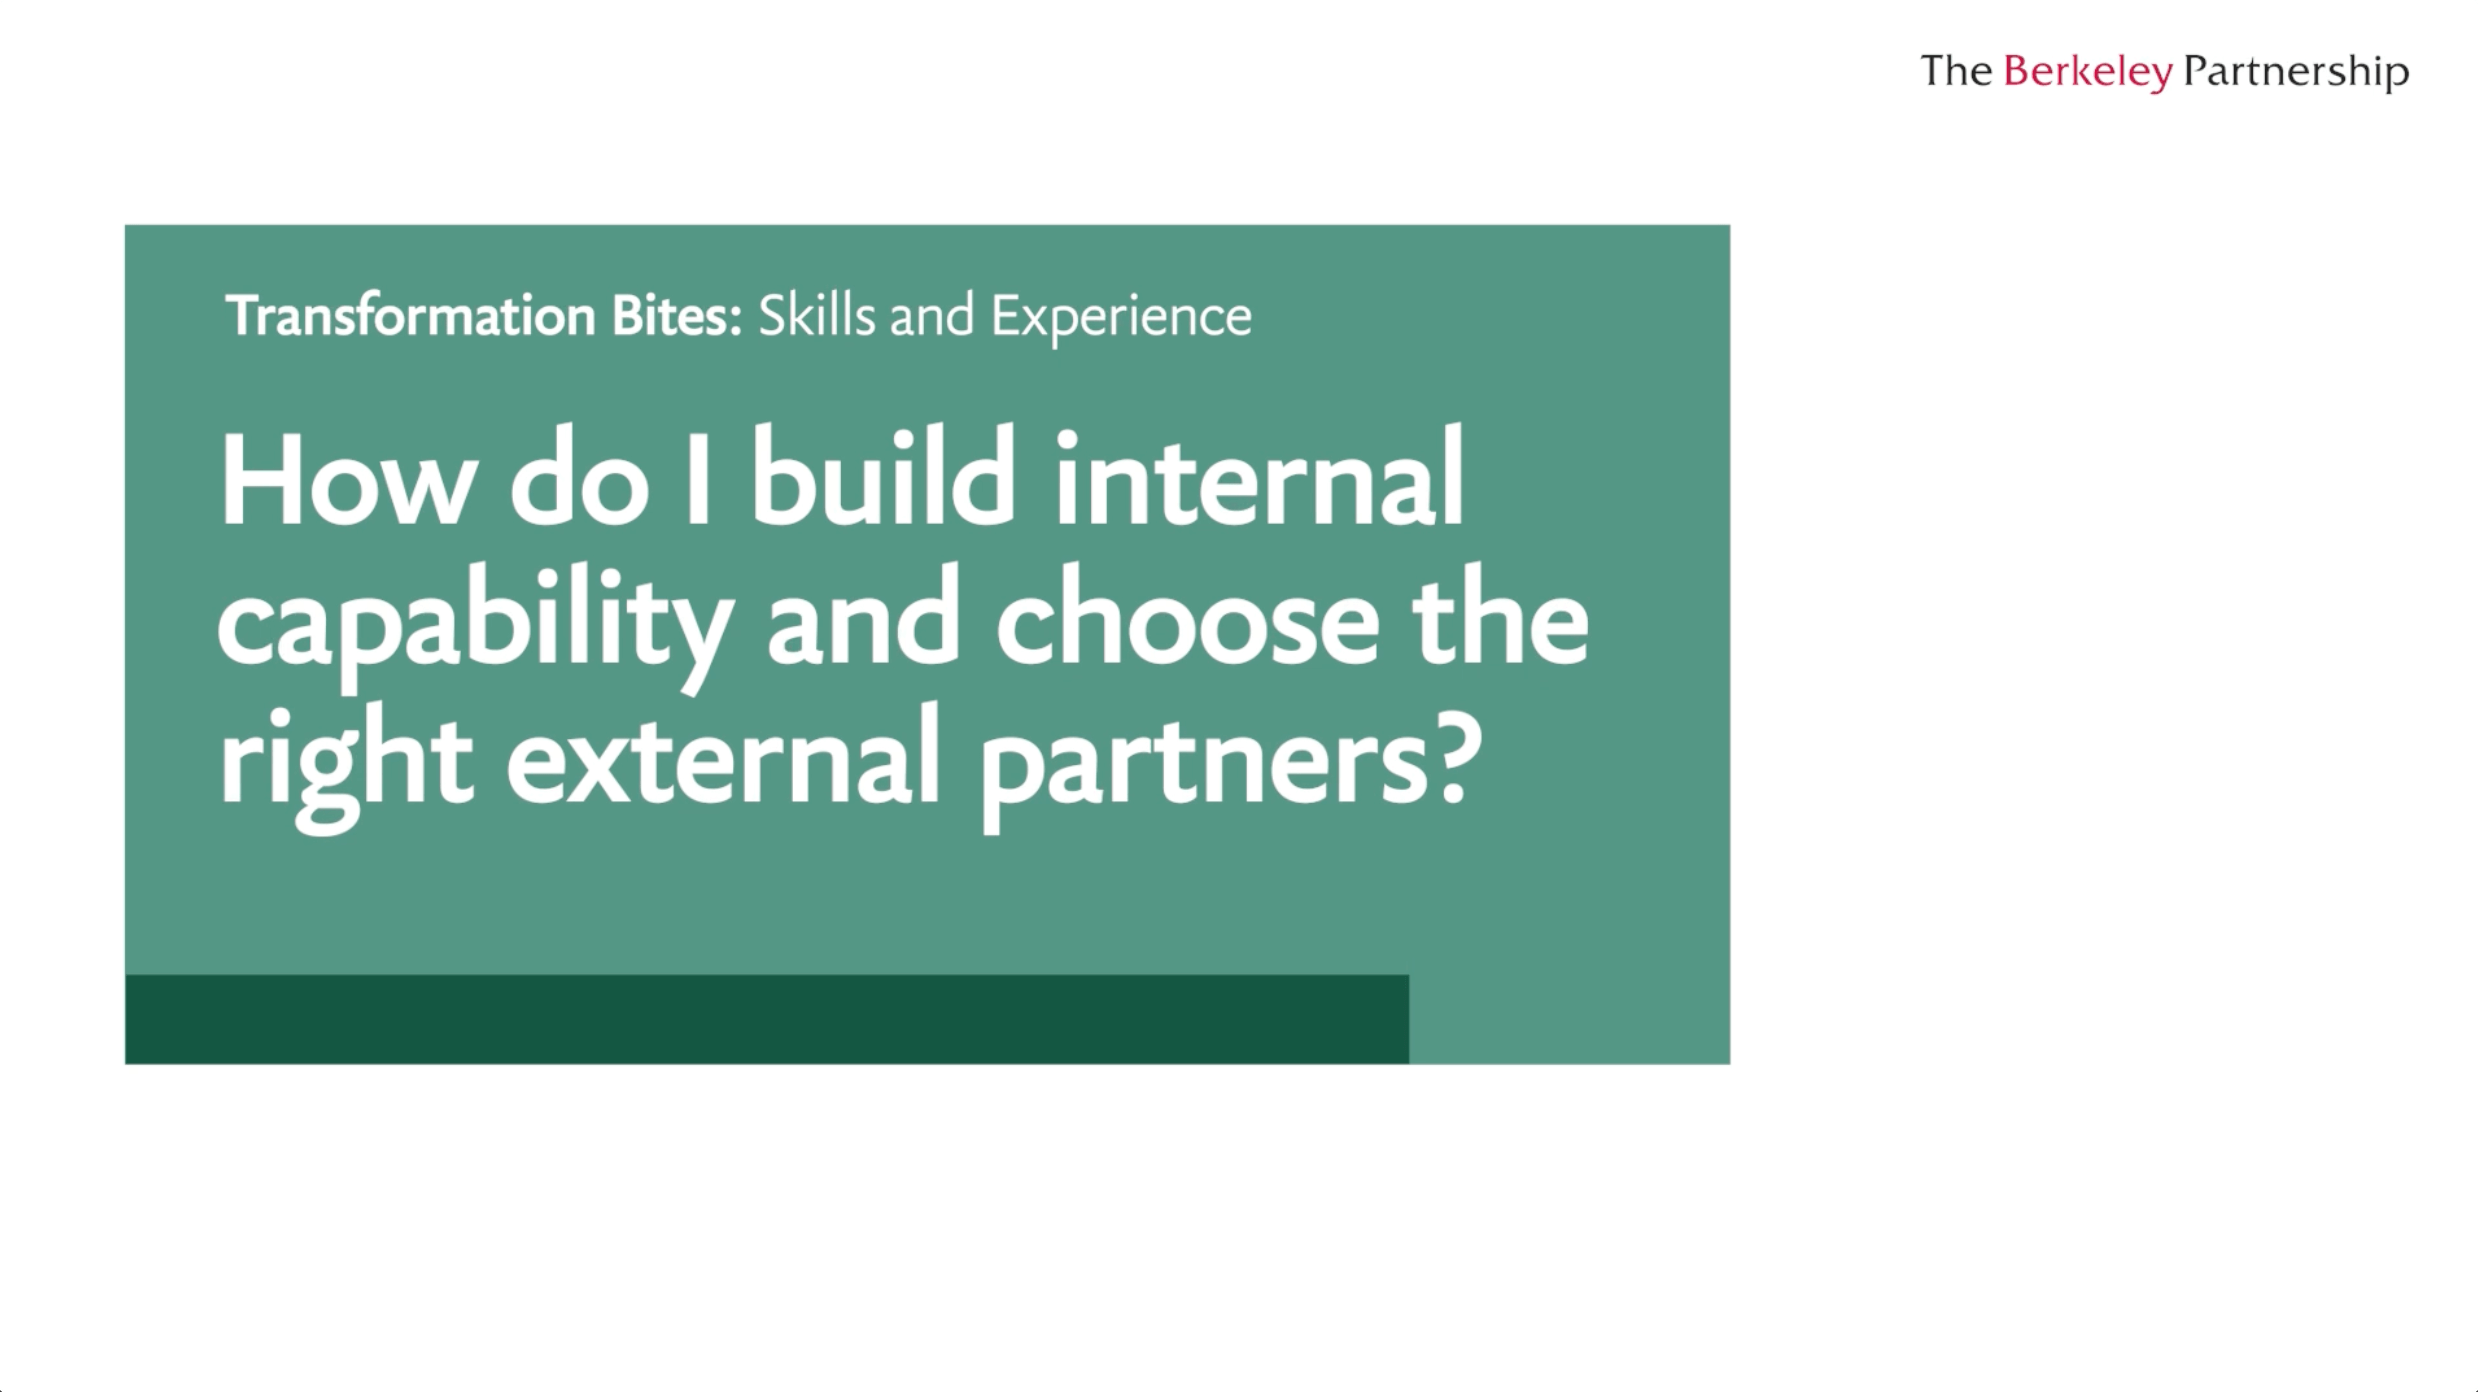 How do I build internal capability and choose the right external partners? 